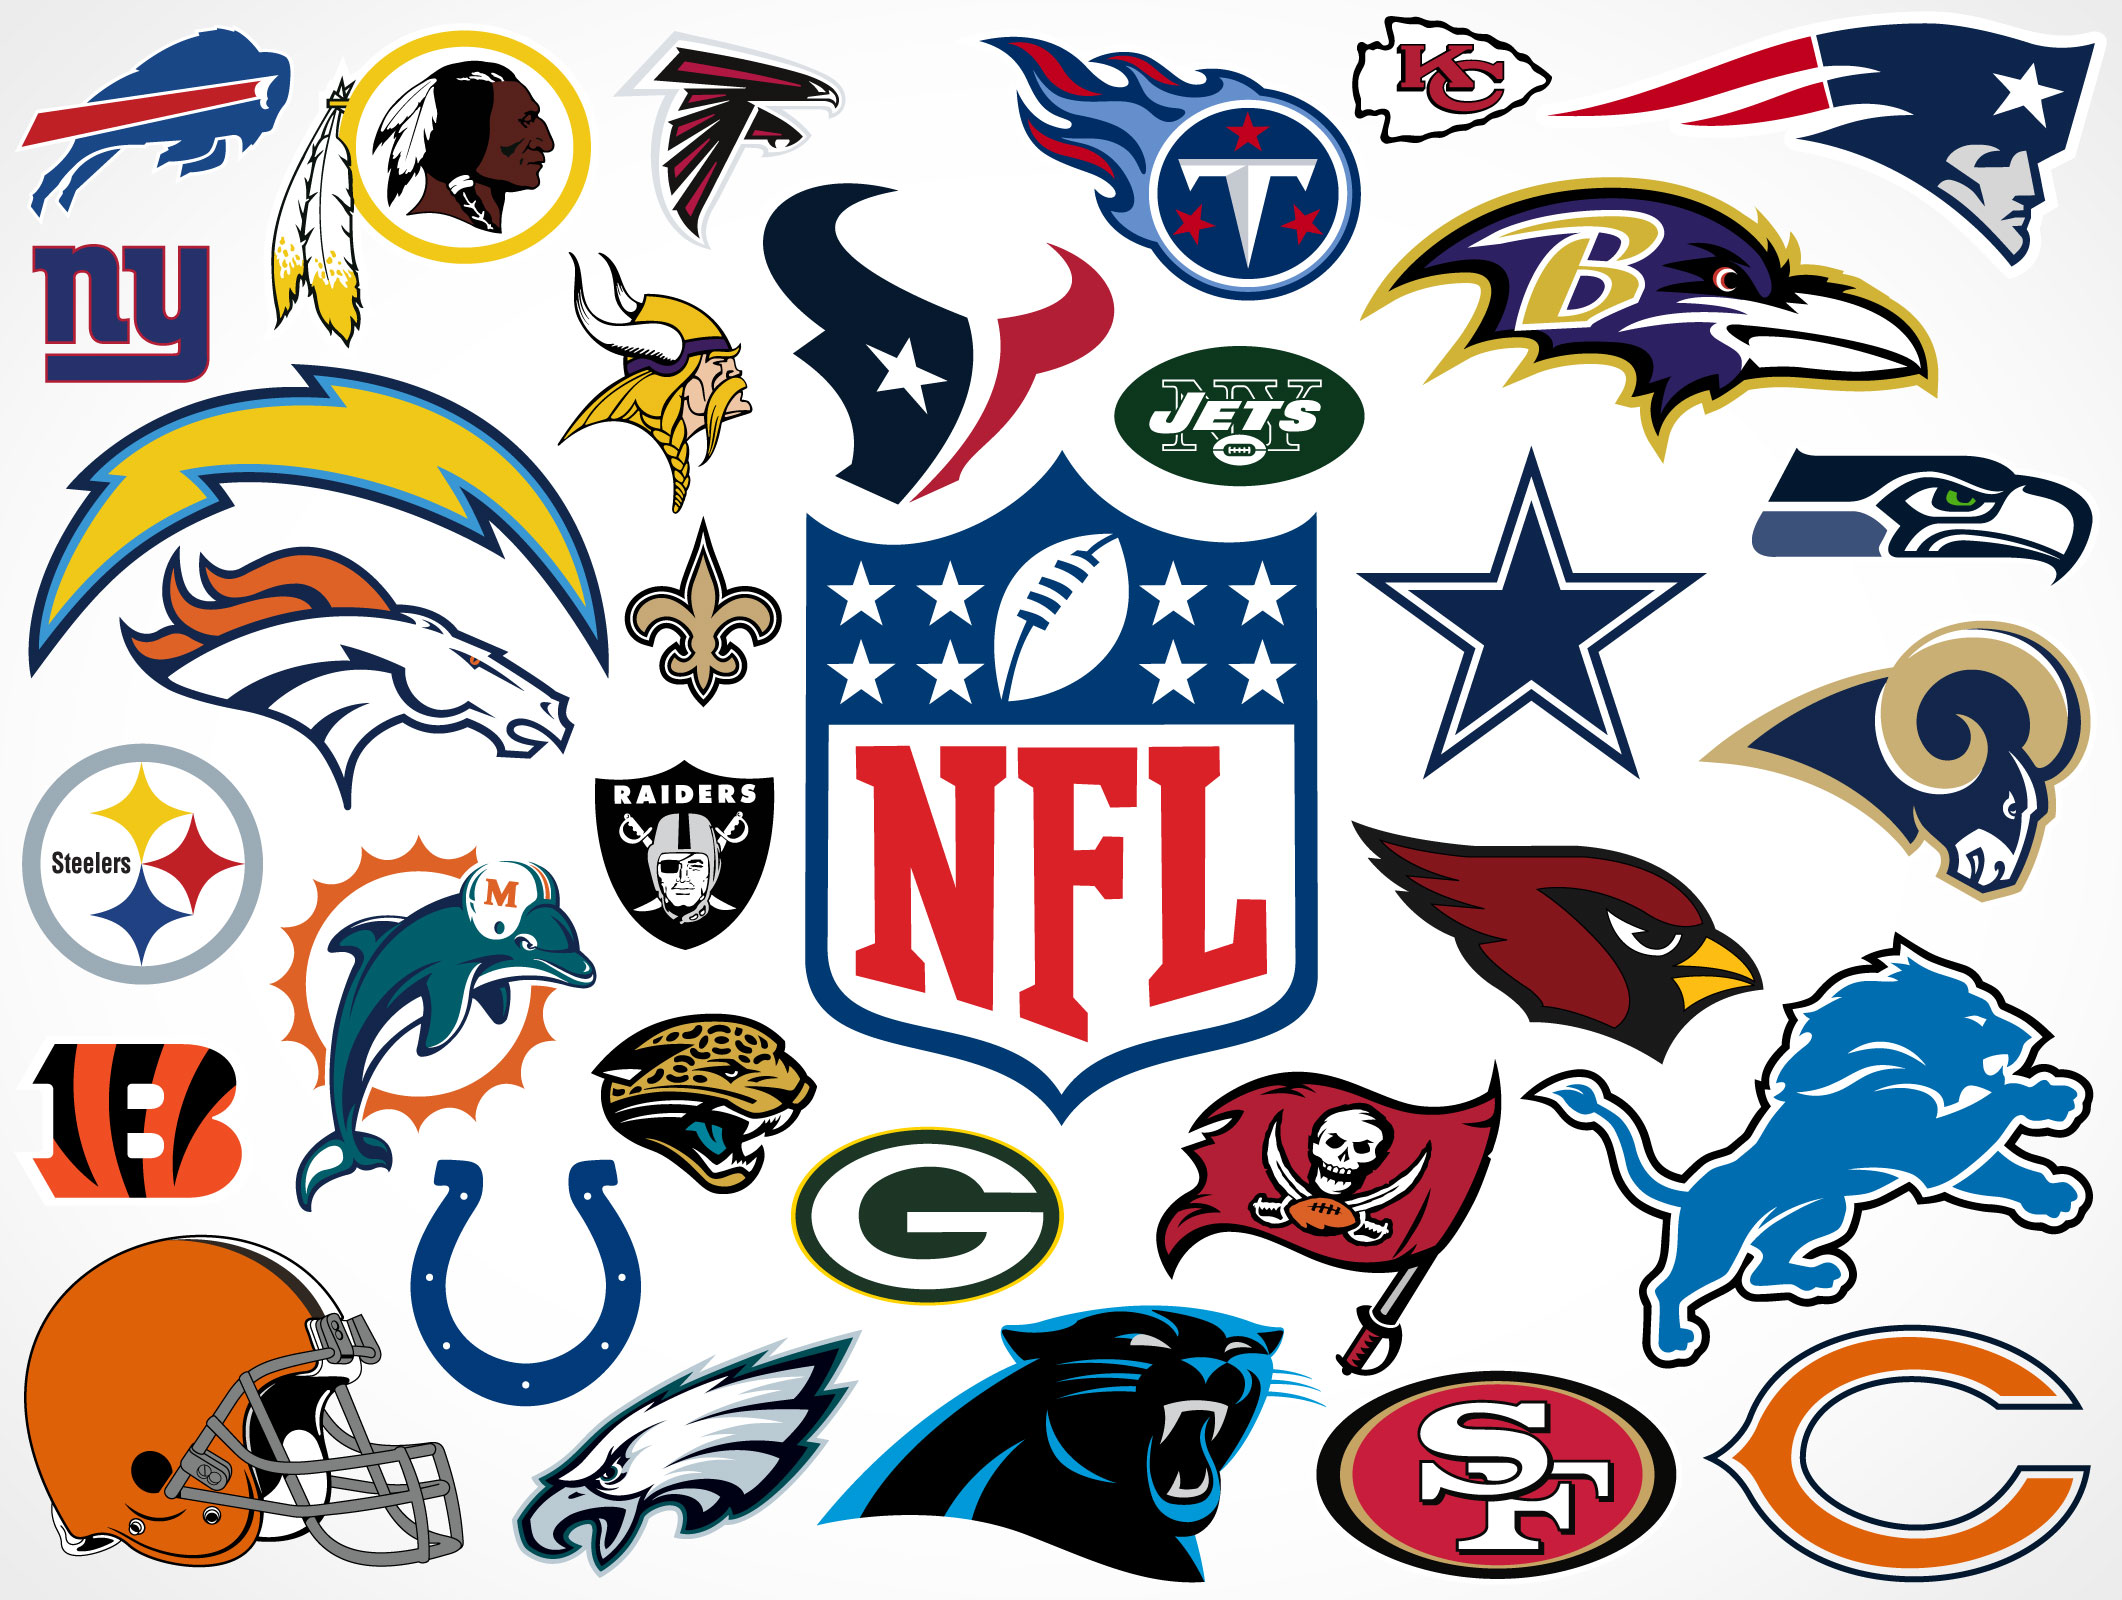 NFL: Playoff Picture